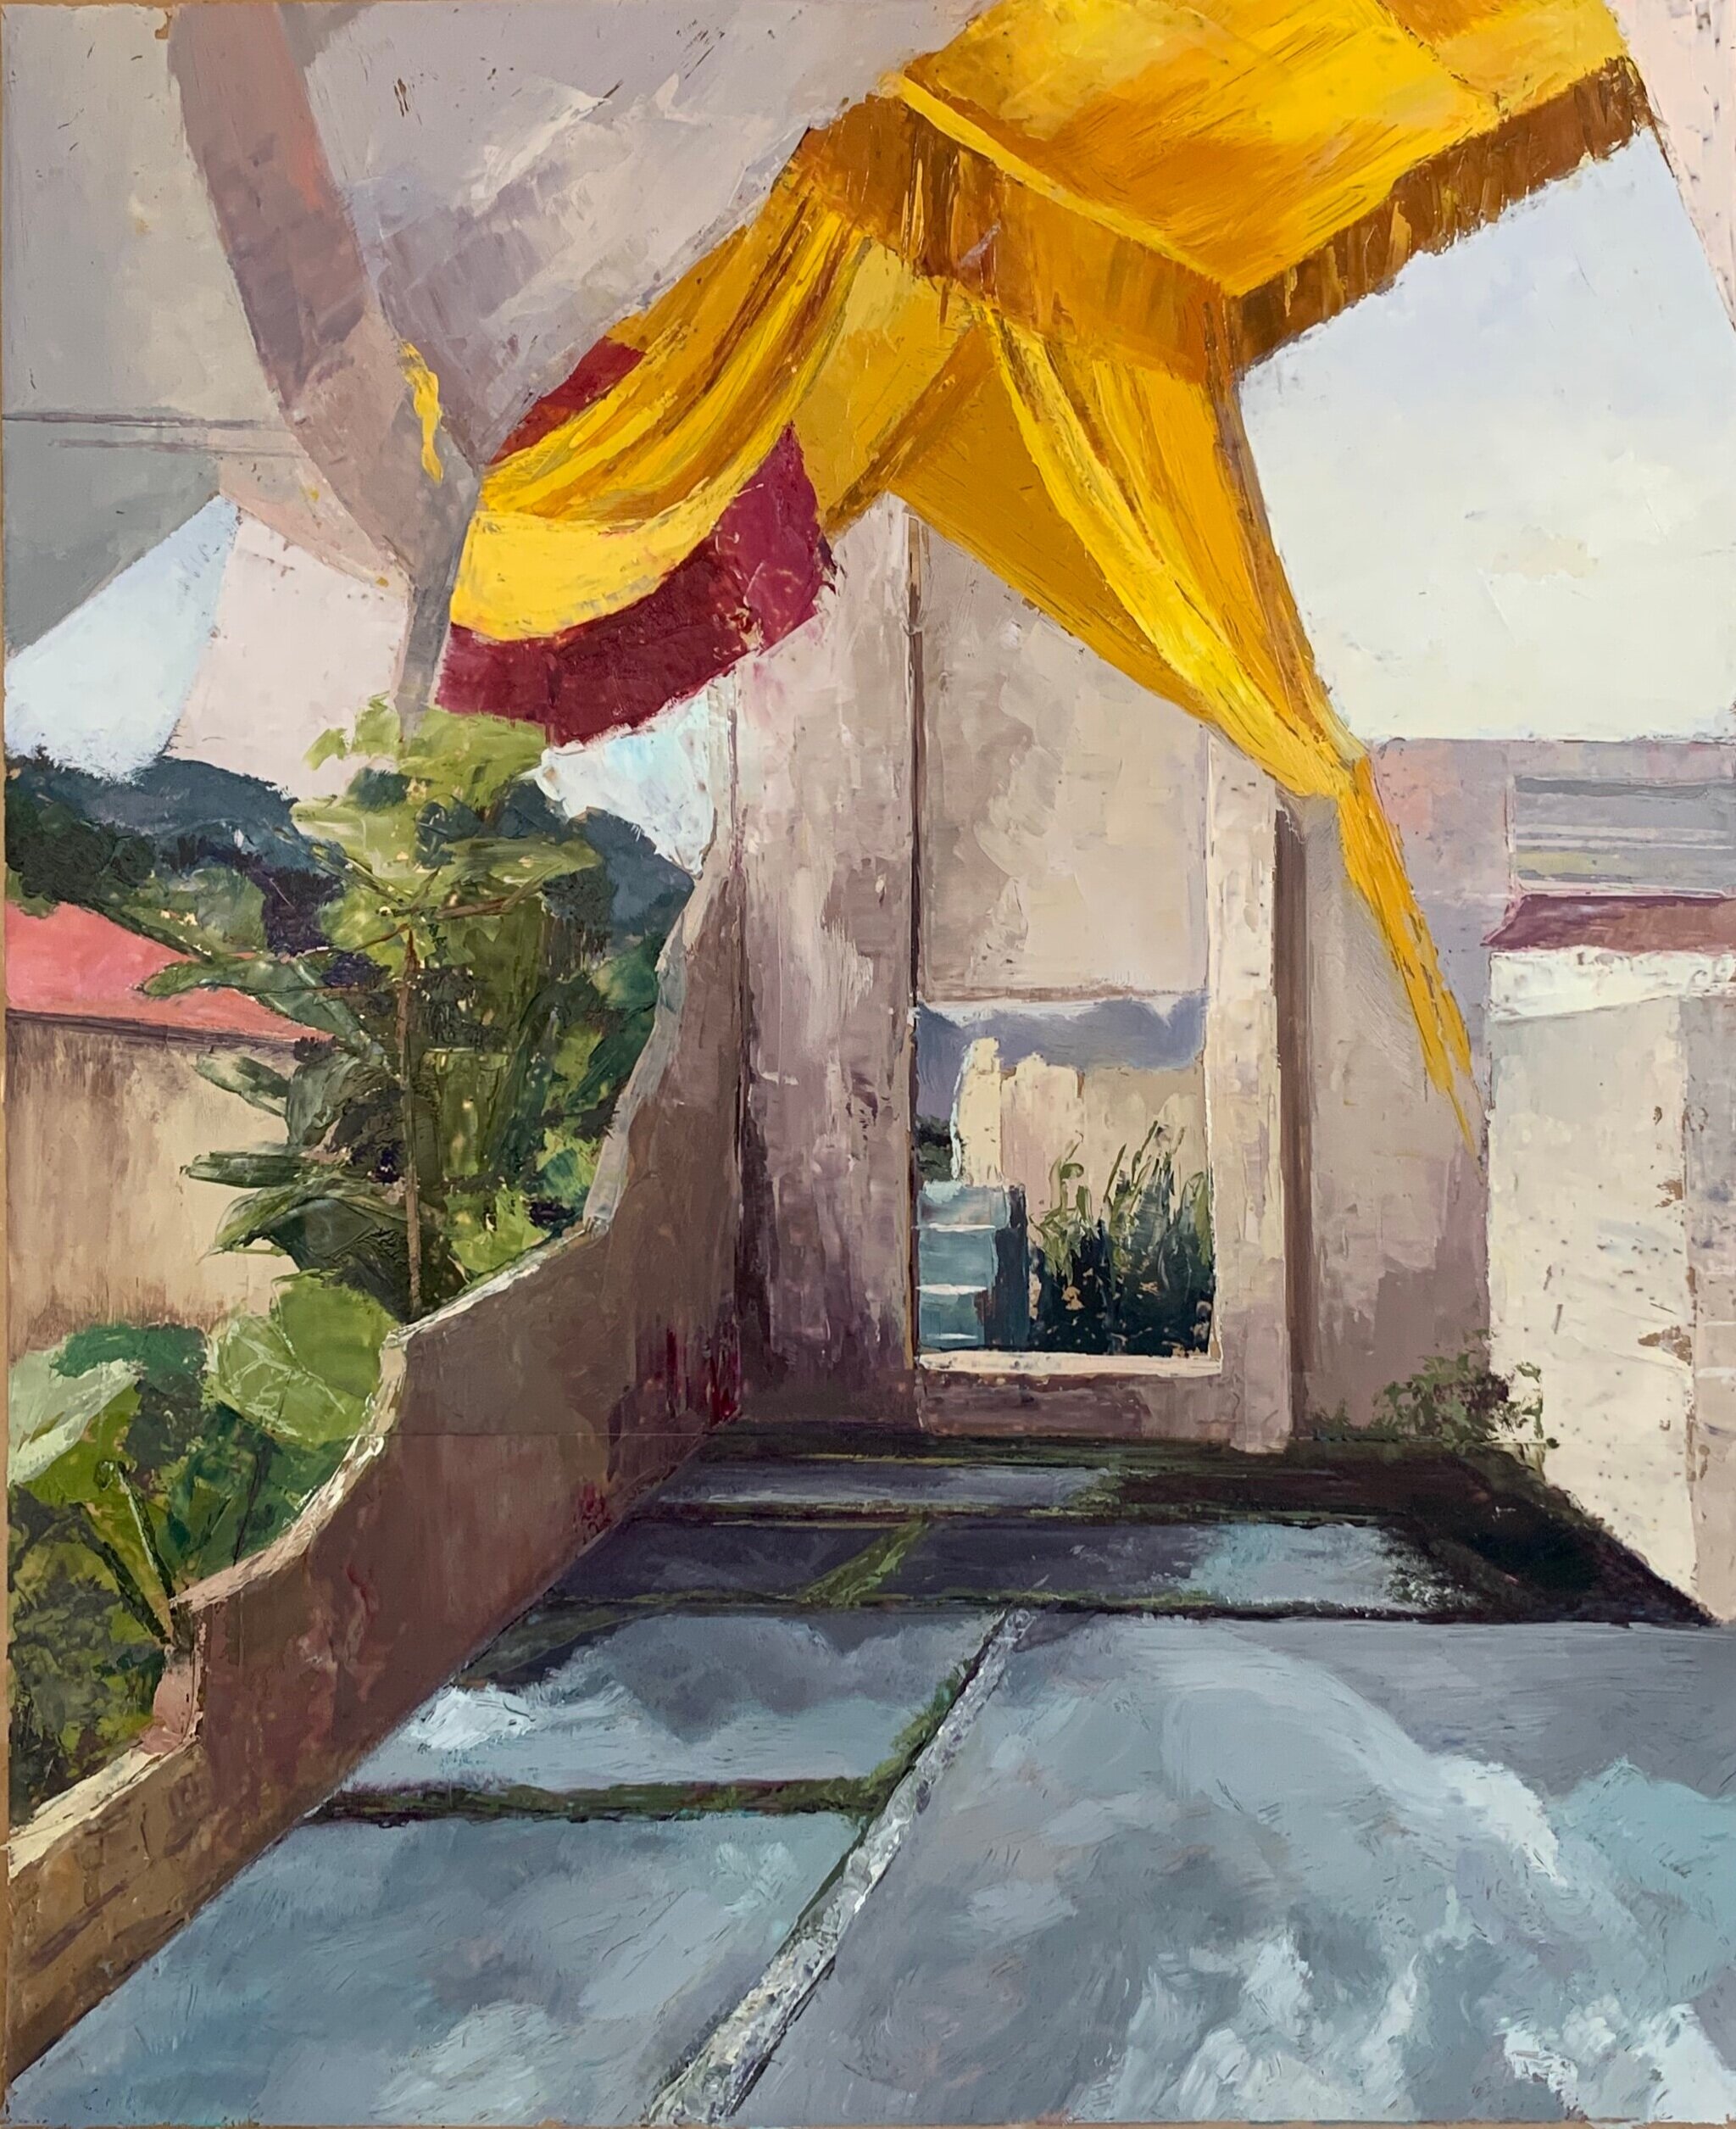   Pu Luong, Angkor,  2019 oil on dura-lar, 16 x 14 in 